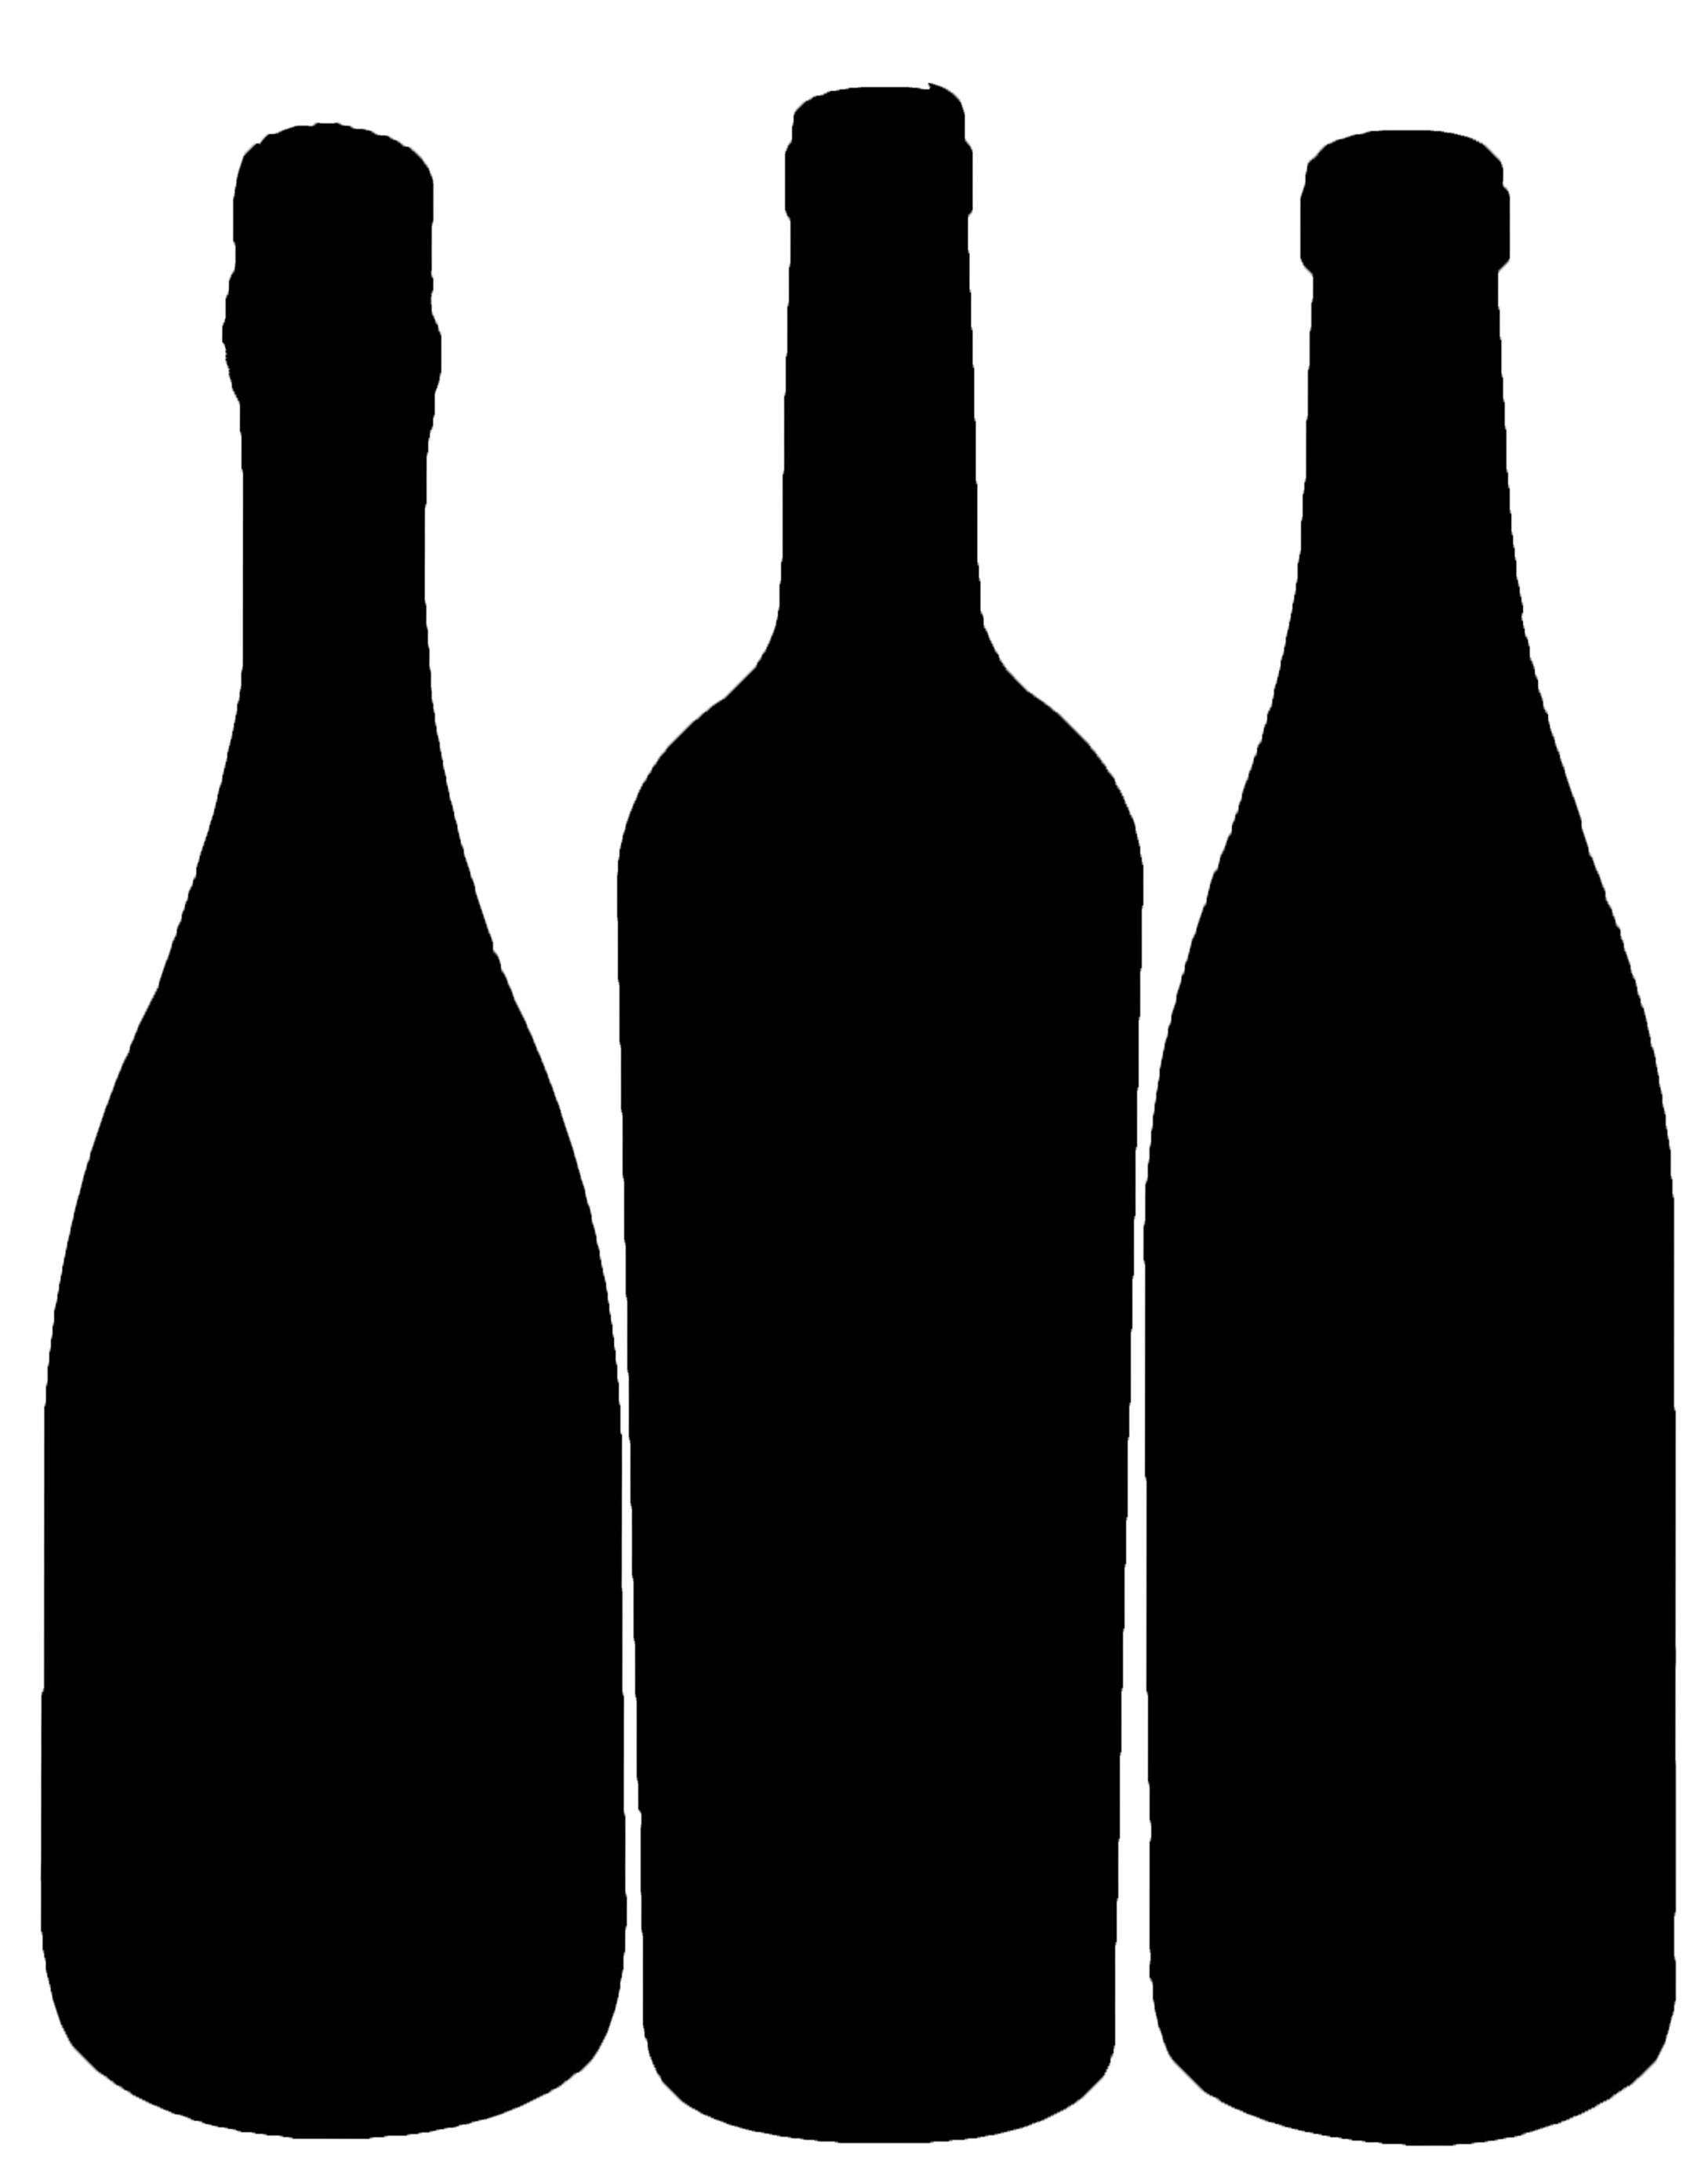 Image of Beer Bottle Clipart #4446, Beer Drawing - Clipartoons